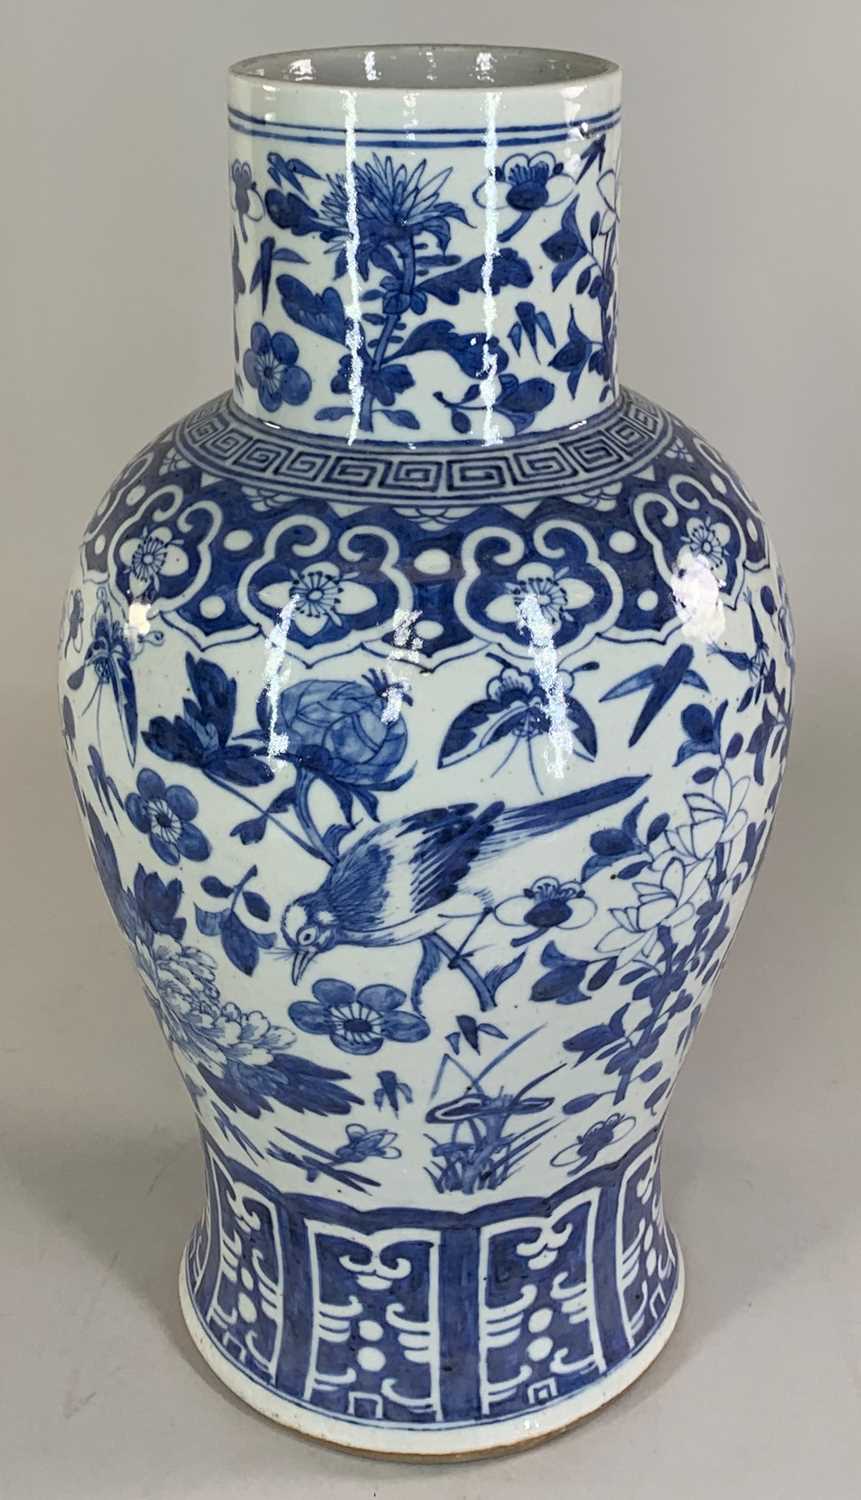 CHINESE BLUE & WHITE BALUSTER VASE, late Qing Dynasty, painted with flowers, insects and birds, - Image 4 of 12